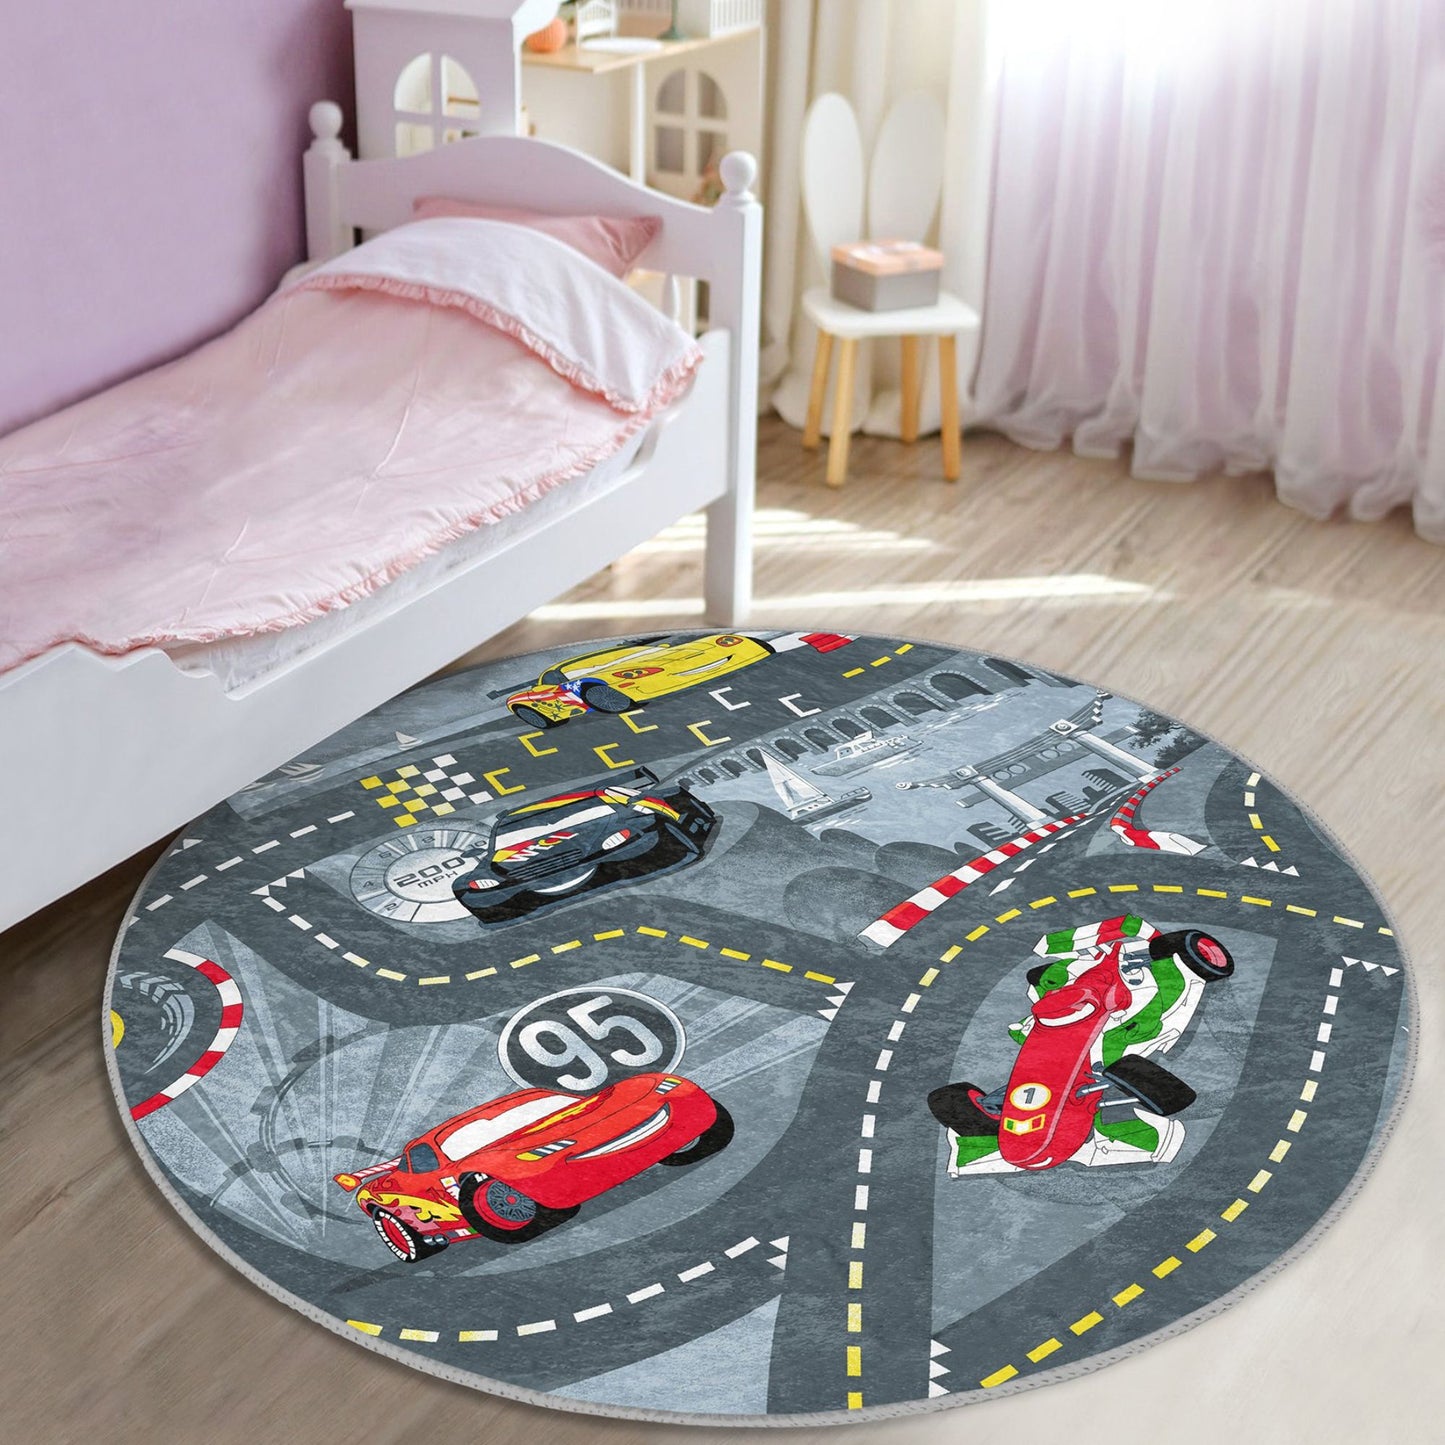 Rug with Race Cars and Roads Design for Boys' Play Area